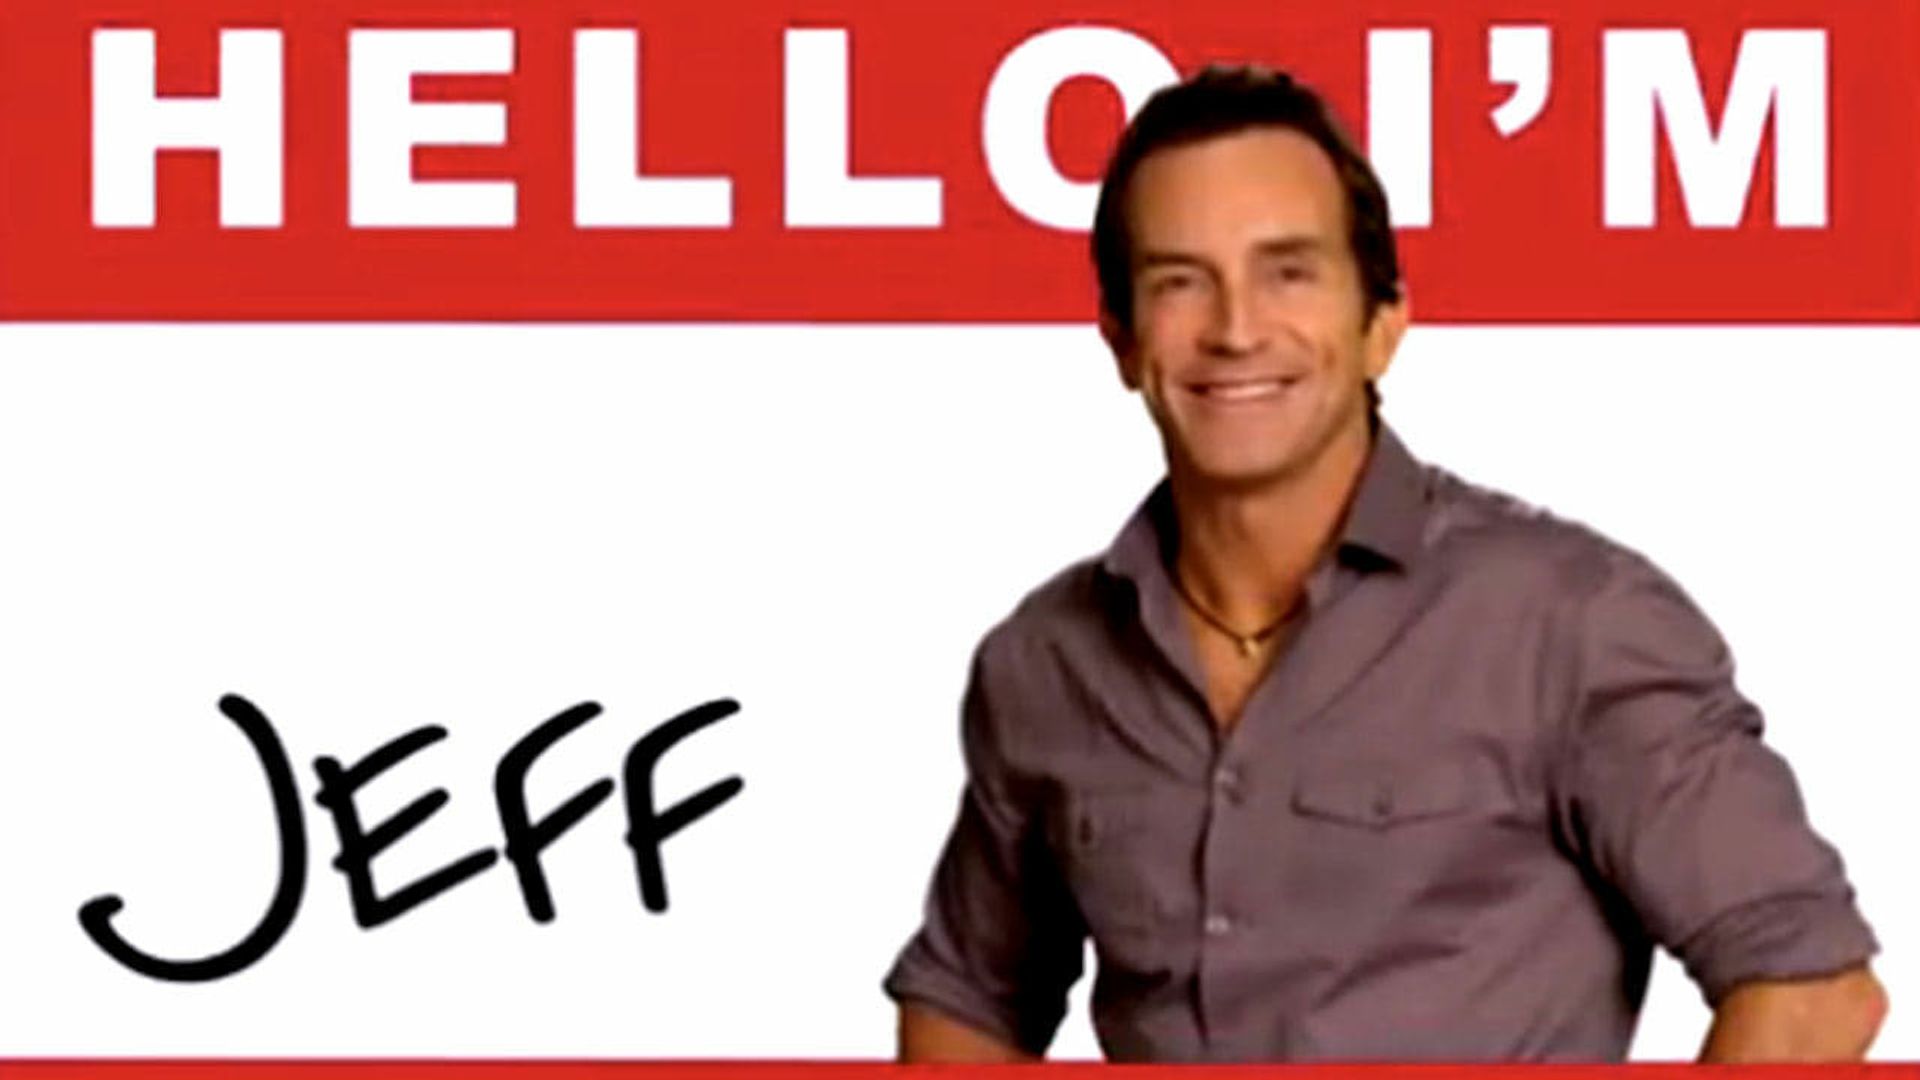 The Jeff Probst Show background